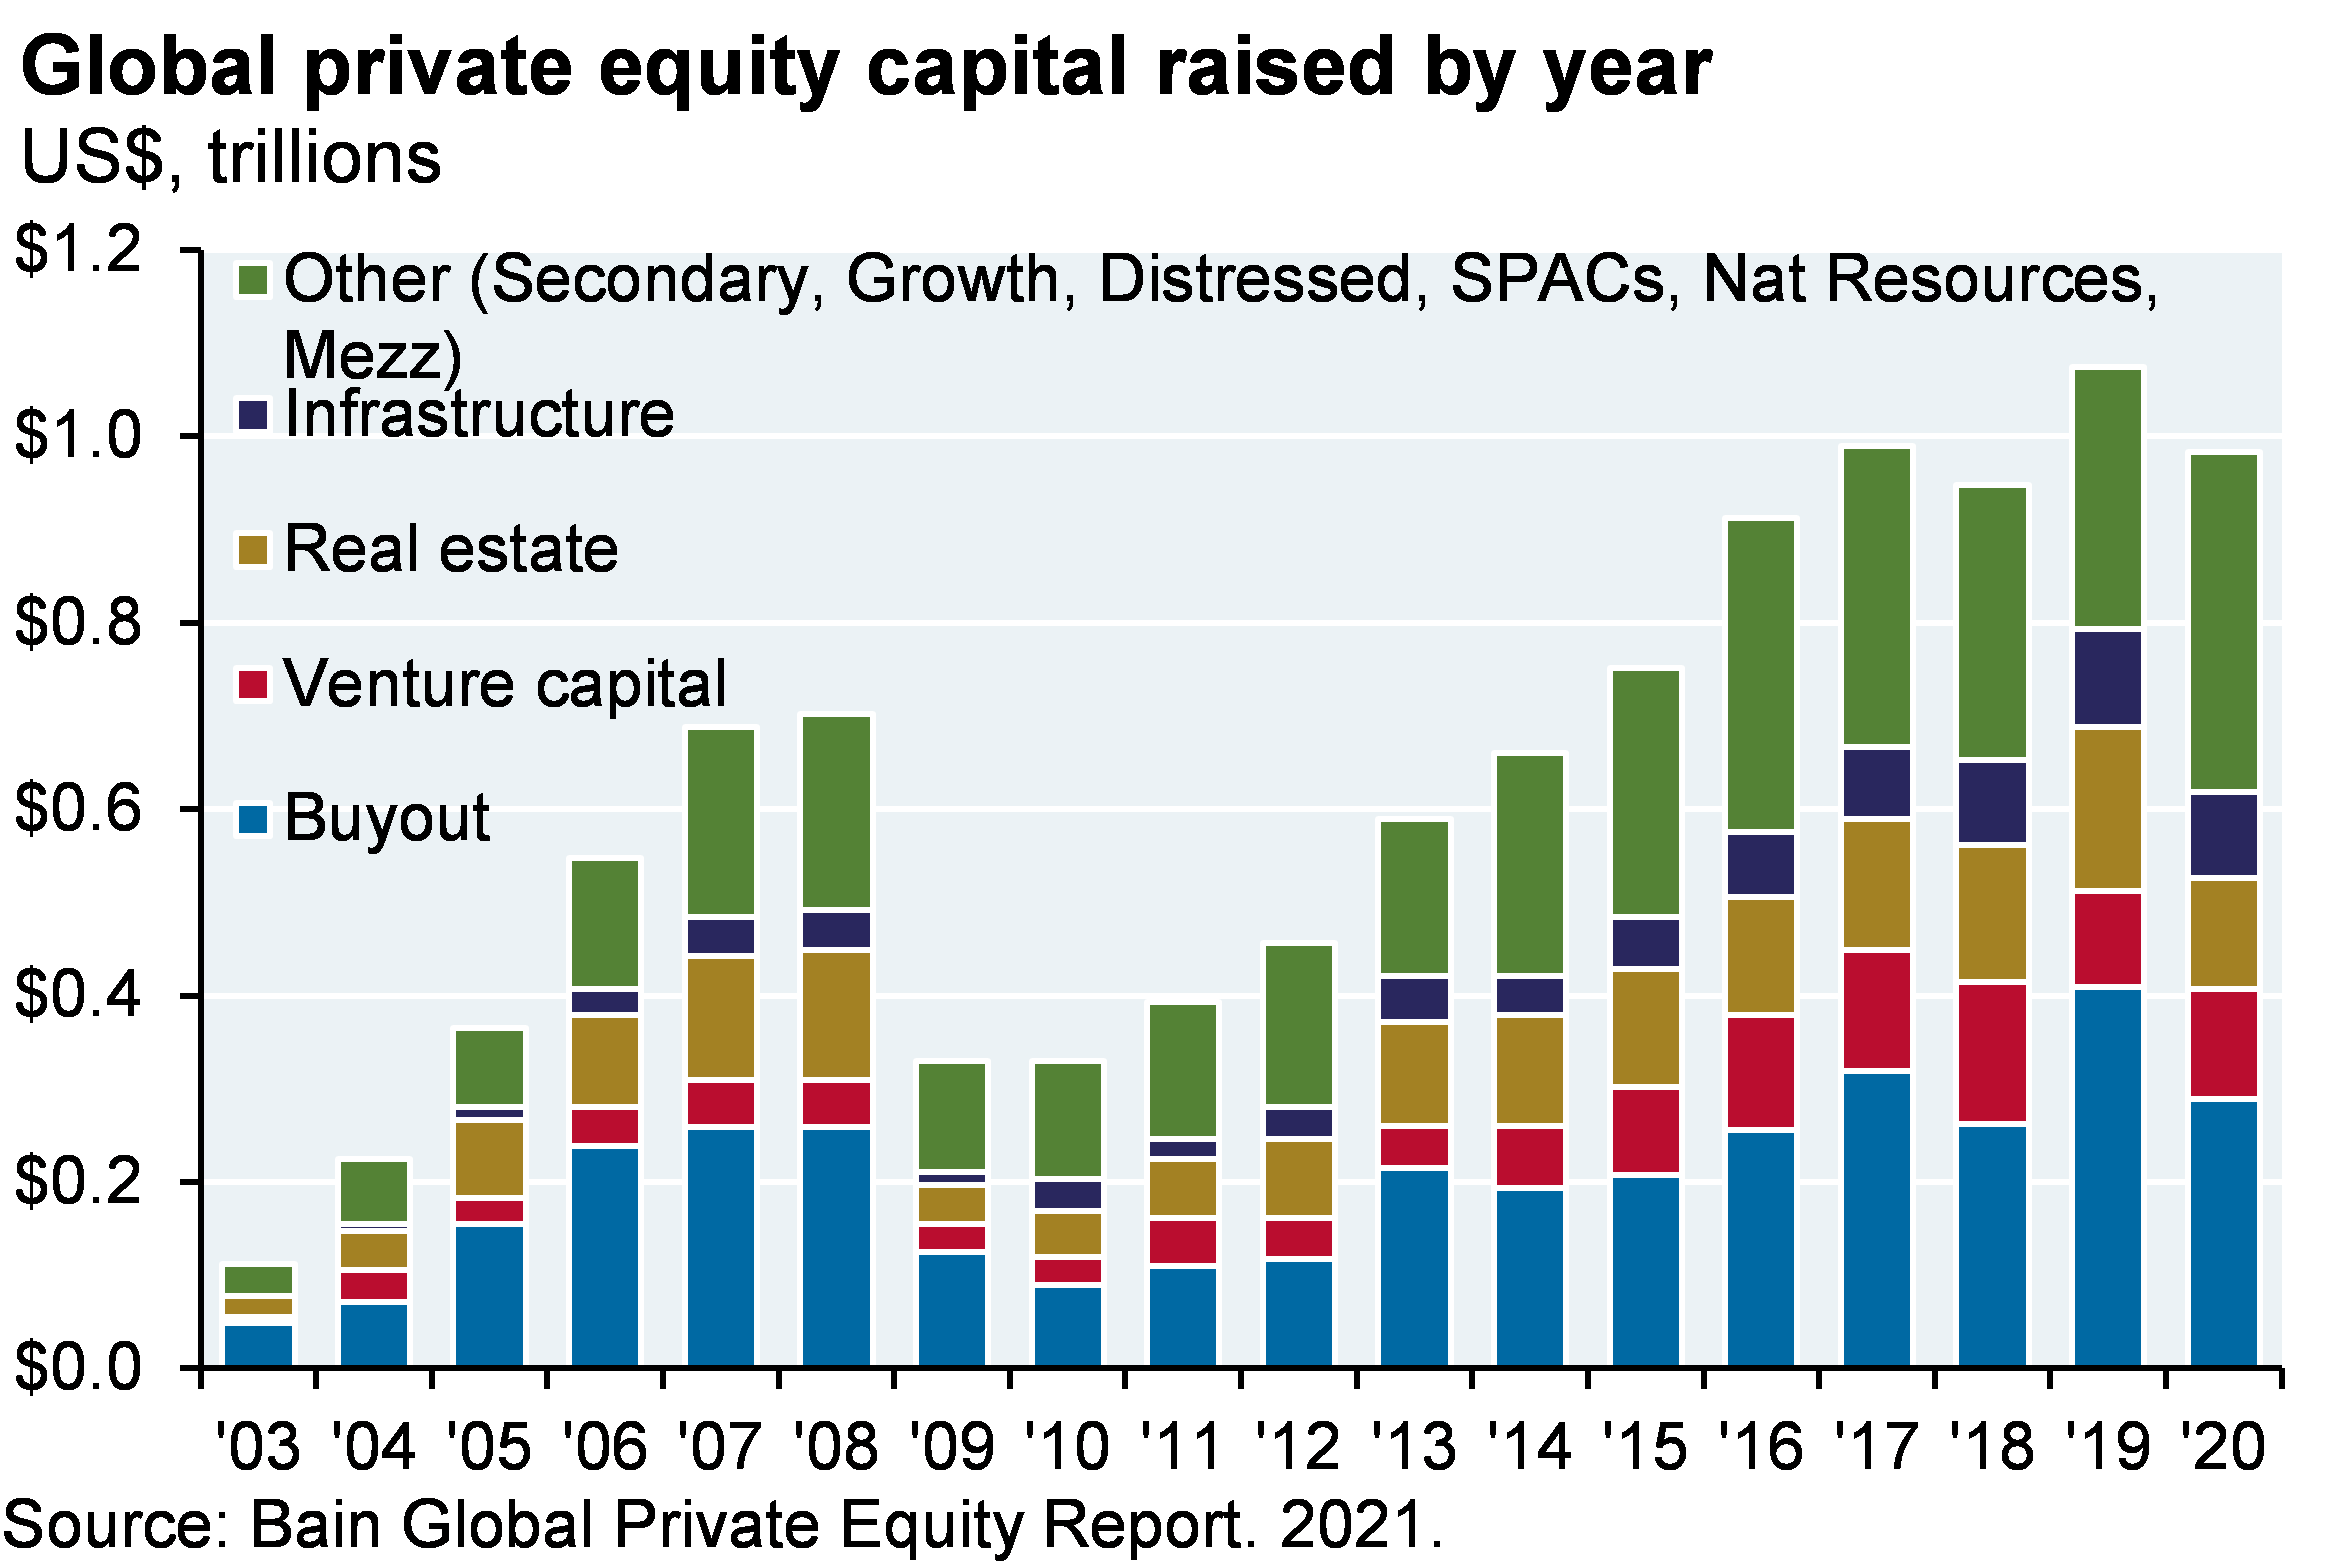 Bar chart which shows global private equity capital raised by year, shown as the breakdown between buyout, venture capital, real estate, infrastructure and other (including secondary, growth, distressed, SPACs, natural resources, mezzanine). Total private equity capital raised increased from around $0.1 trillion in 2003 to $0.7 trillion in 2008, then declined to $0.3 trillion in 2009. Since then, private equity capital has increased to its latest value of around $1 trillion in 2020. From 2003-2009, buyout made up nearly half of private equity capital raised, with a quarter made up of ‚Äúother‚Äù. However, in recent years, ‚Äúother‚Äù makes up about half to a third of private equity capital raised, with buyout representing around a third and the remaining third split fairly evenly across real estate, venture capital and infrastructure.